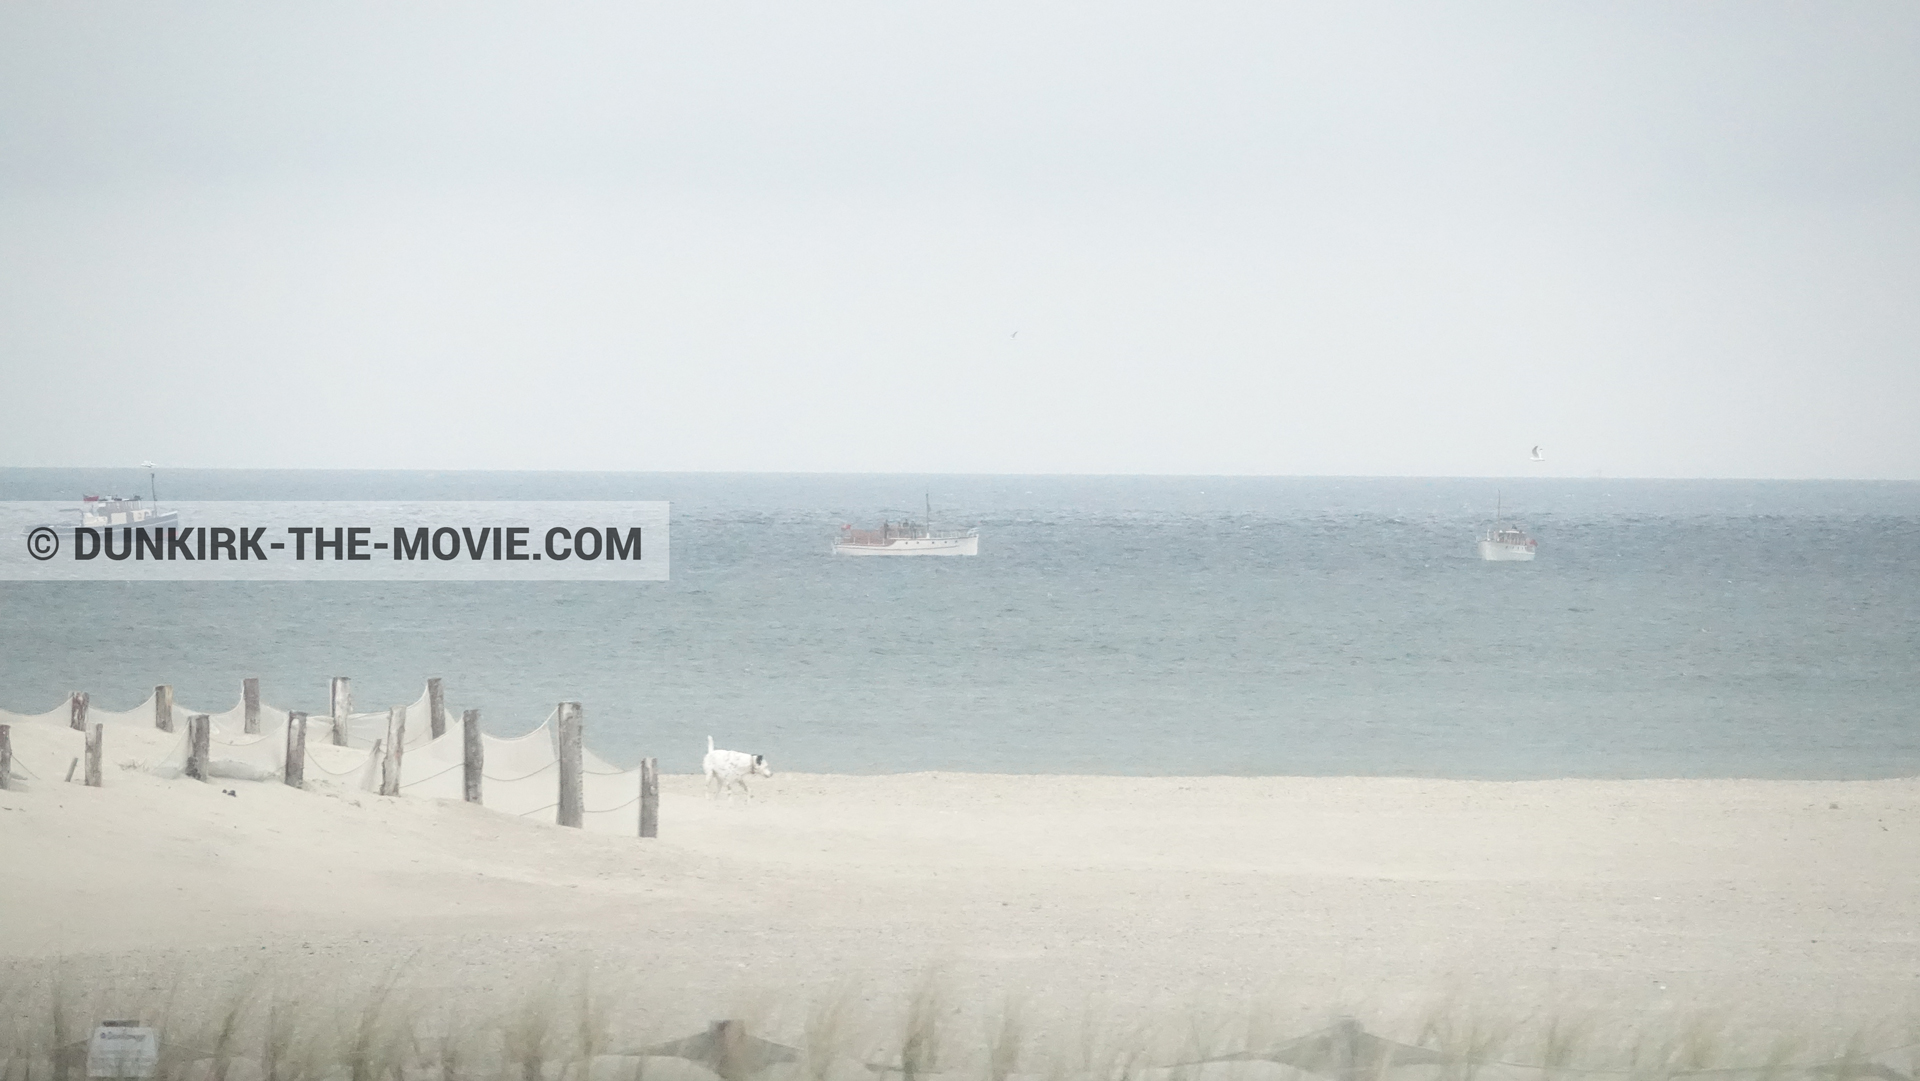 Picture with boat, grey sky, beach,  from behind the scene of the Dunkirk movie by Nolan